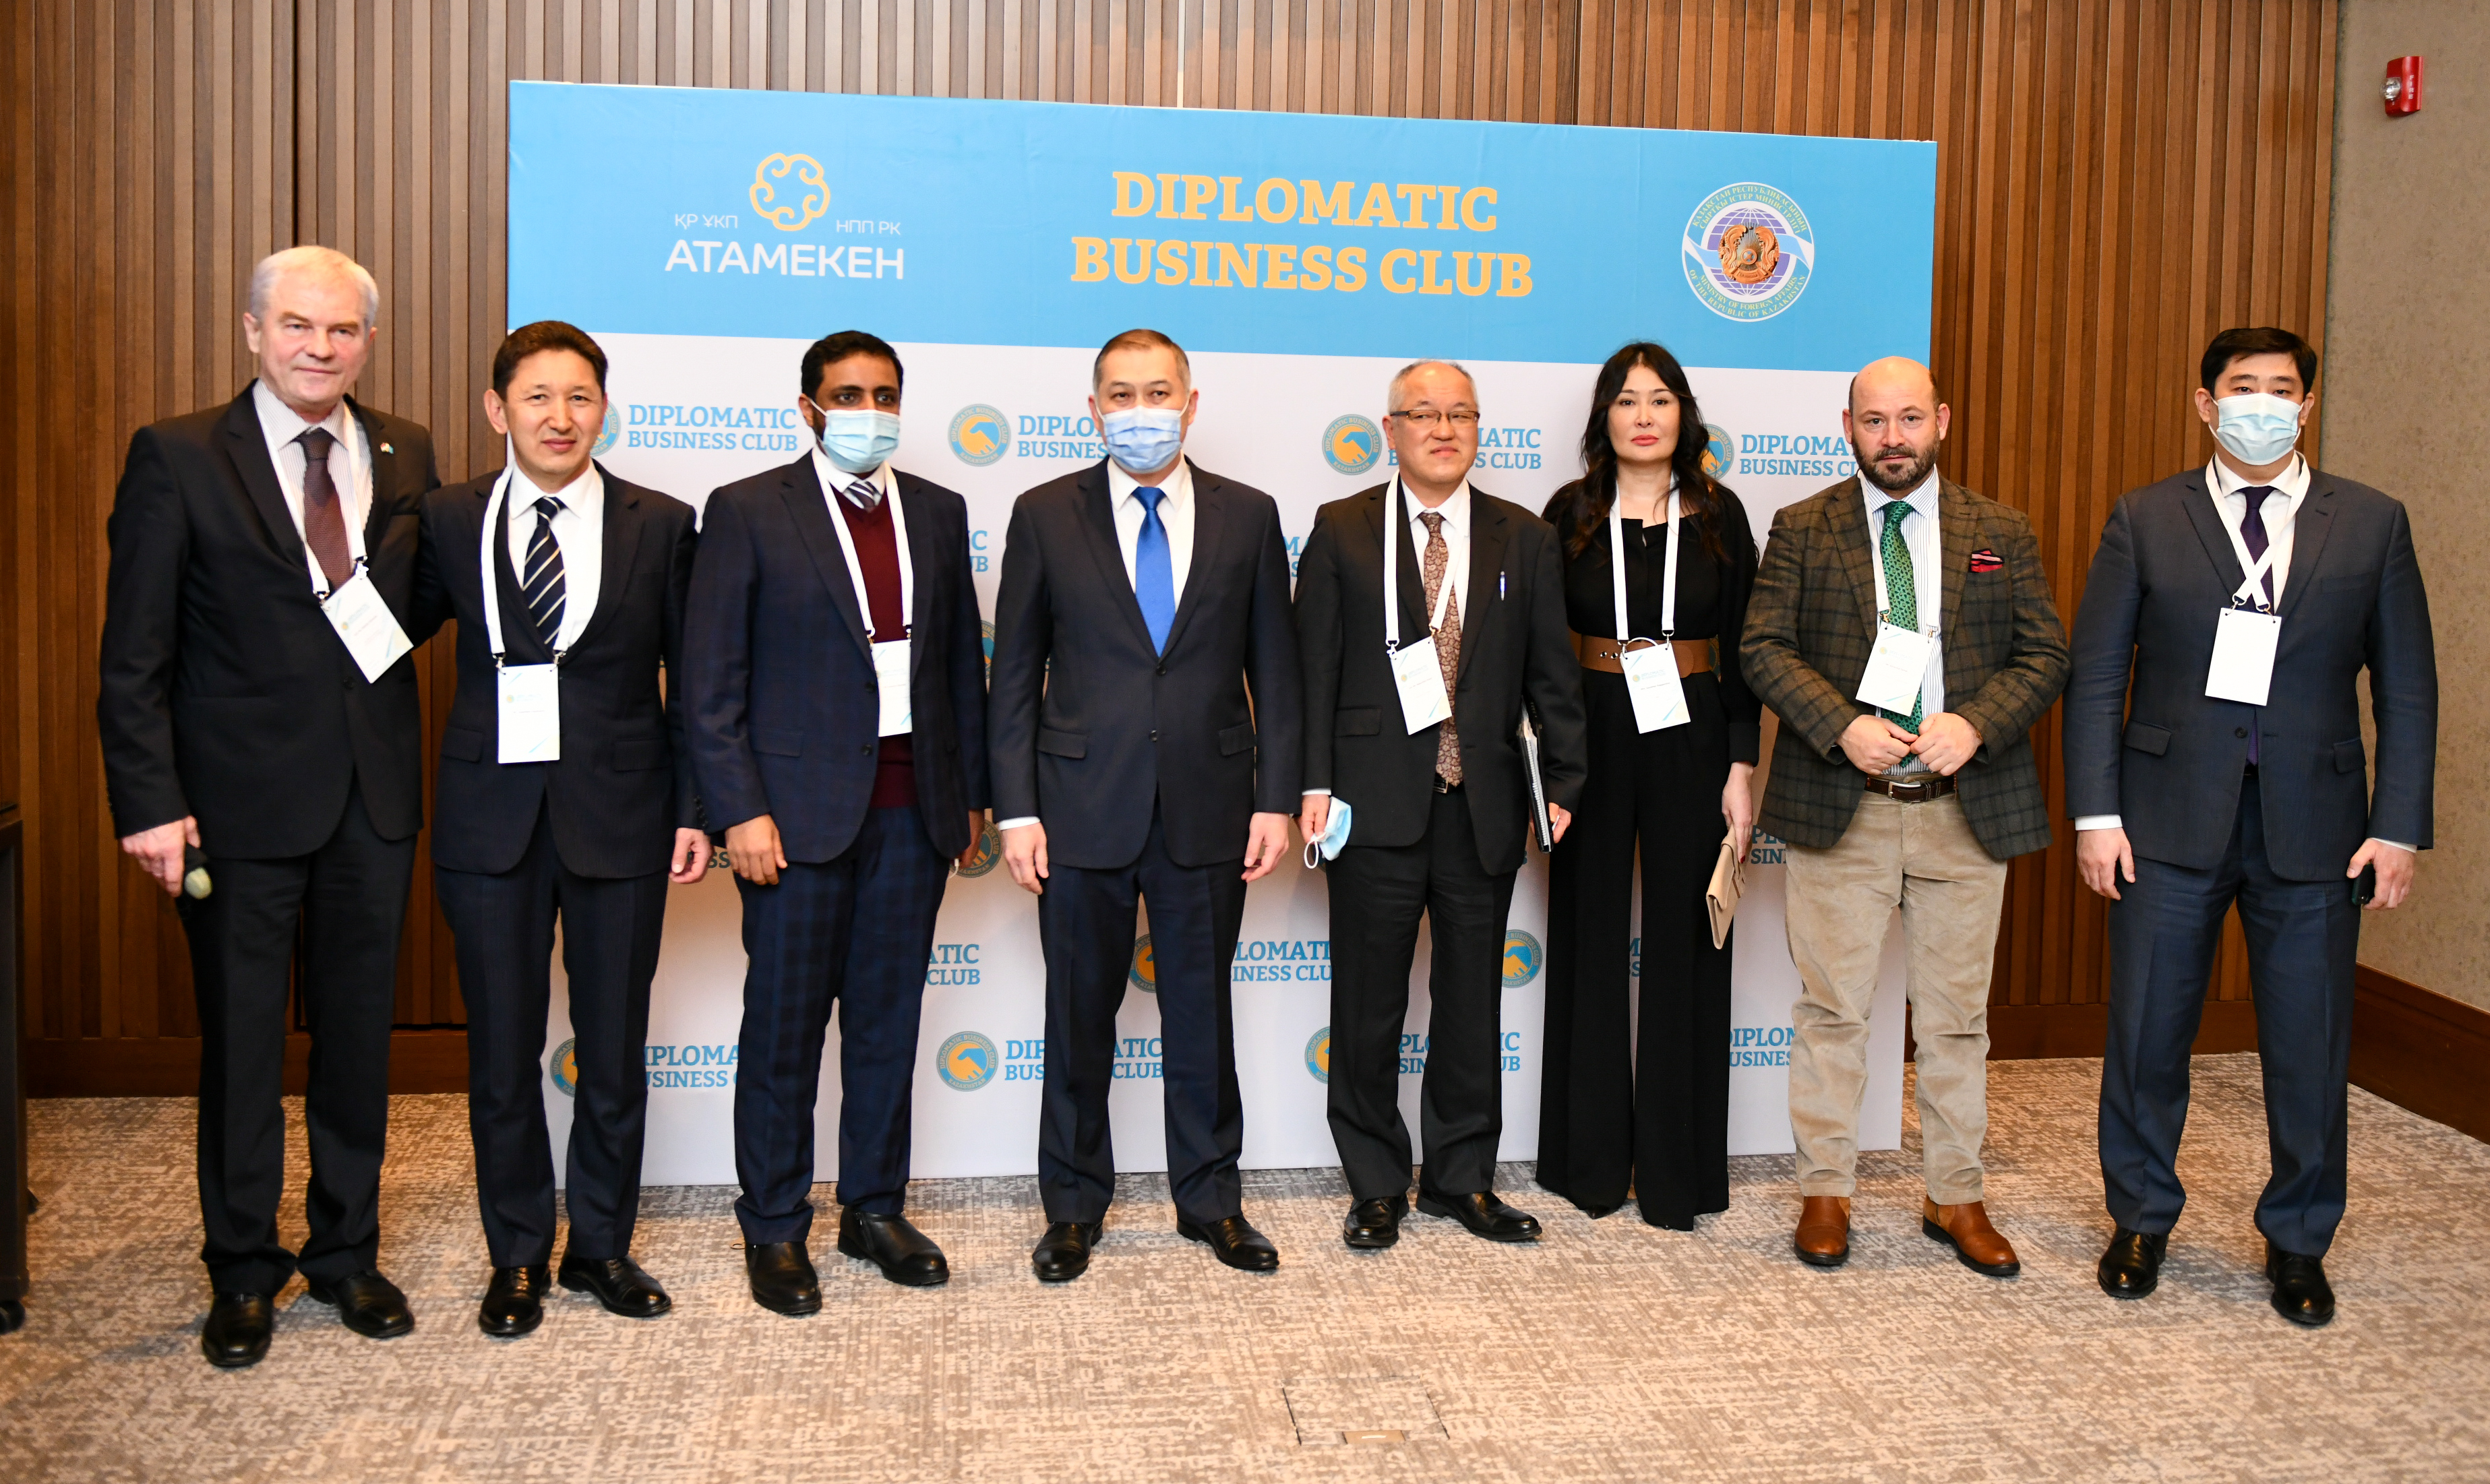 Cooperation of CICA countries in economic dimension discussed at diplomatic Business club meeting in Nur-Sultan